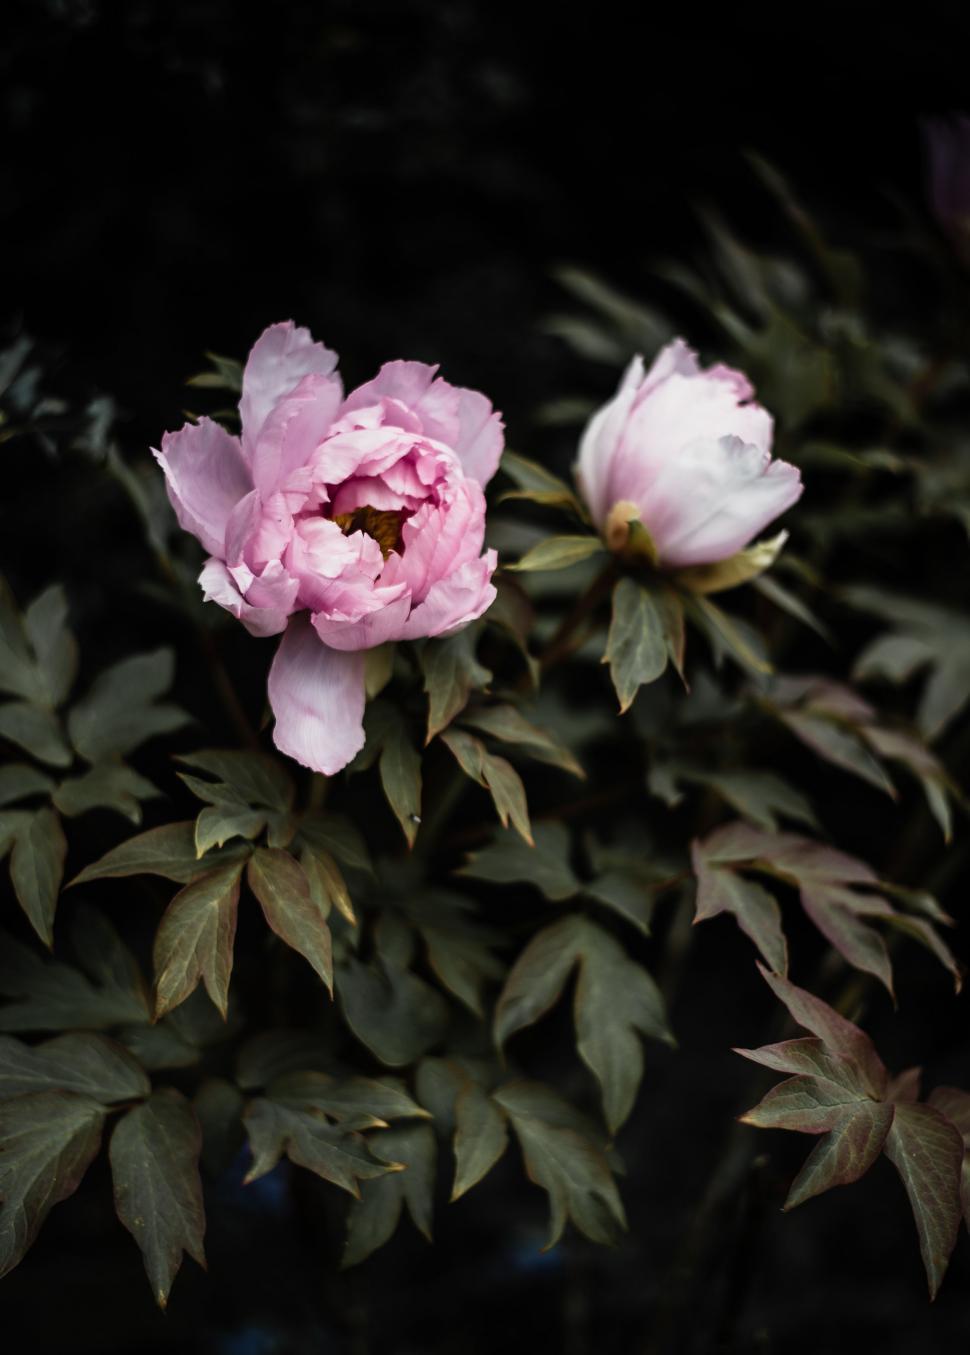 Free Image of Two Pink Flowers Blooming in the Dark 